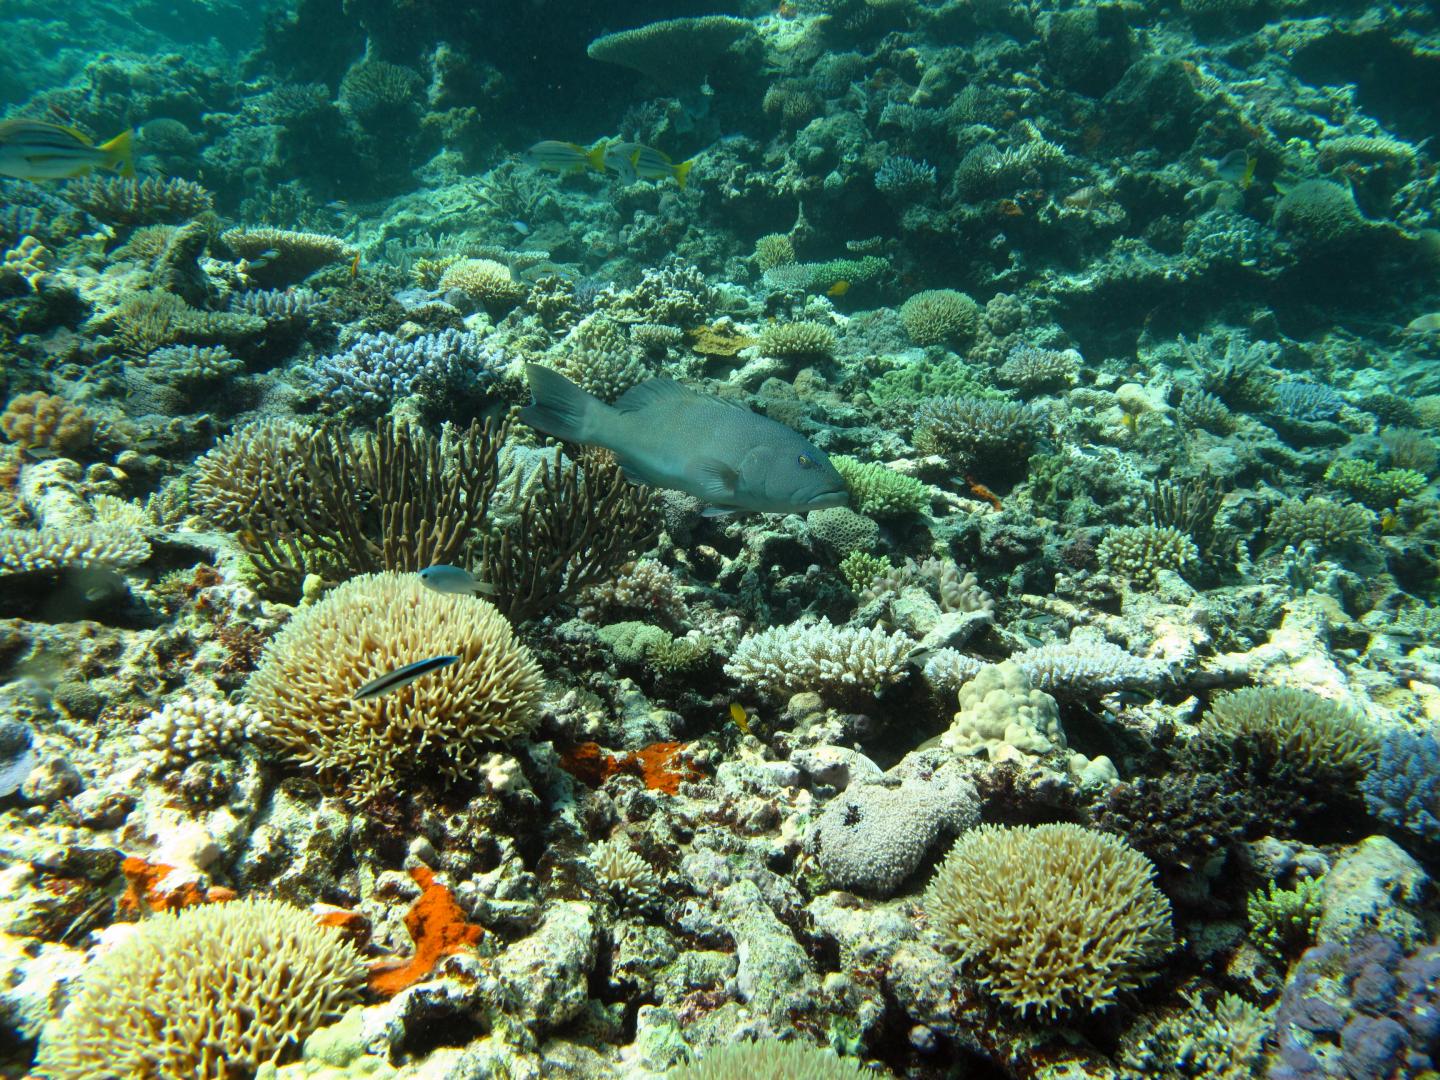 Scene at the Great Barrier Reef